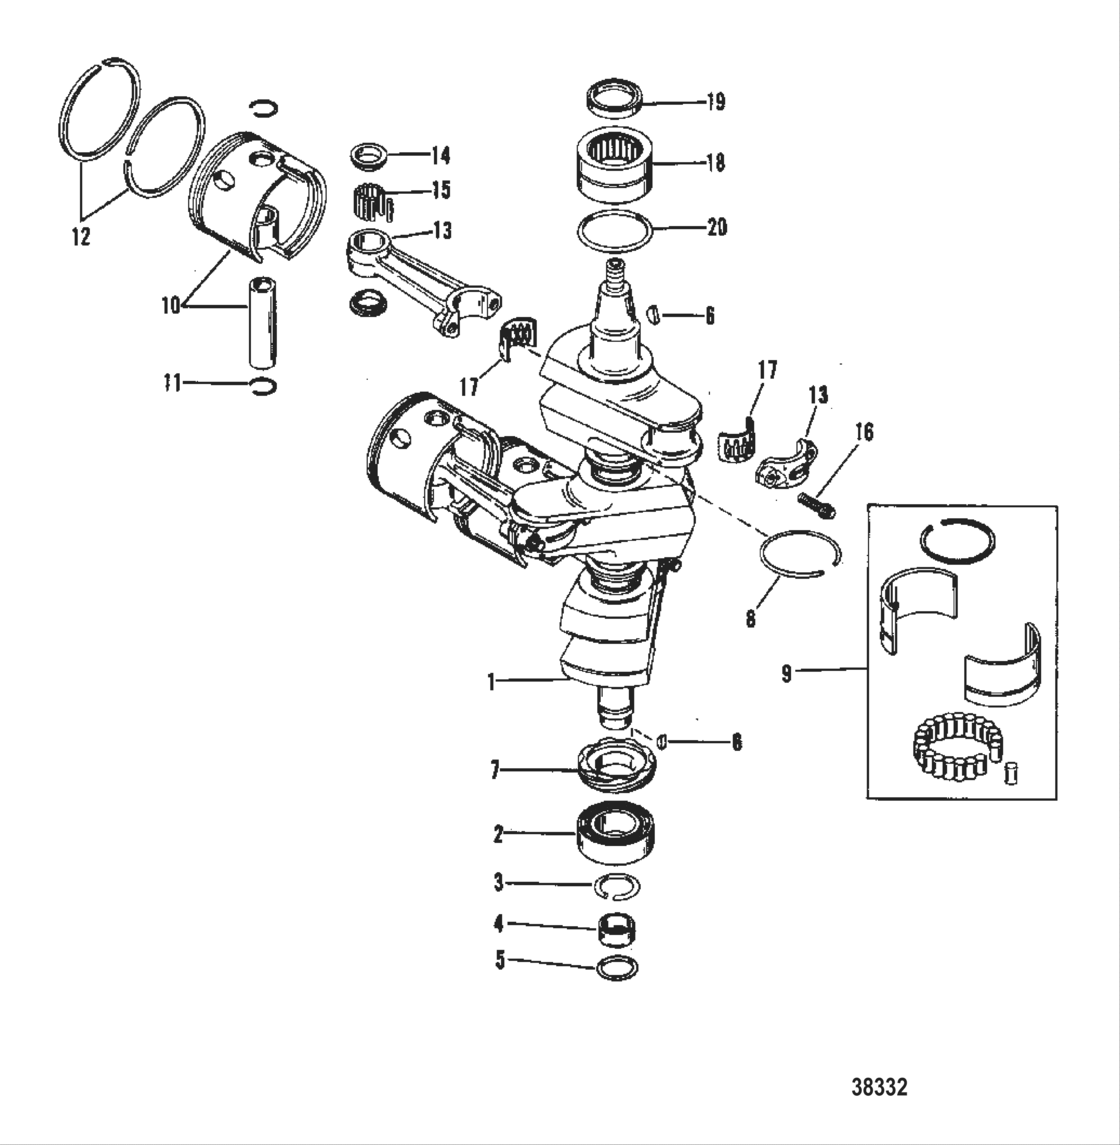 Crankshaft, Pistons And Connecting Rods (#638-8532--1)